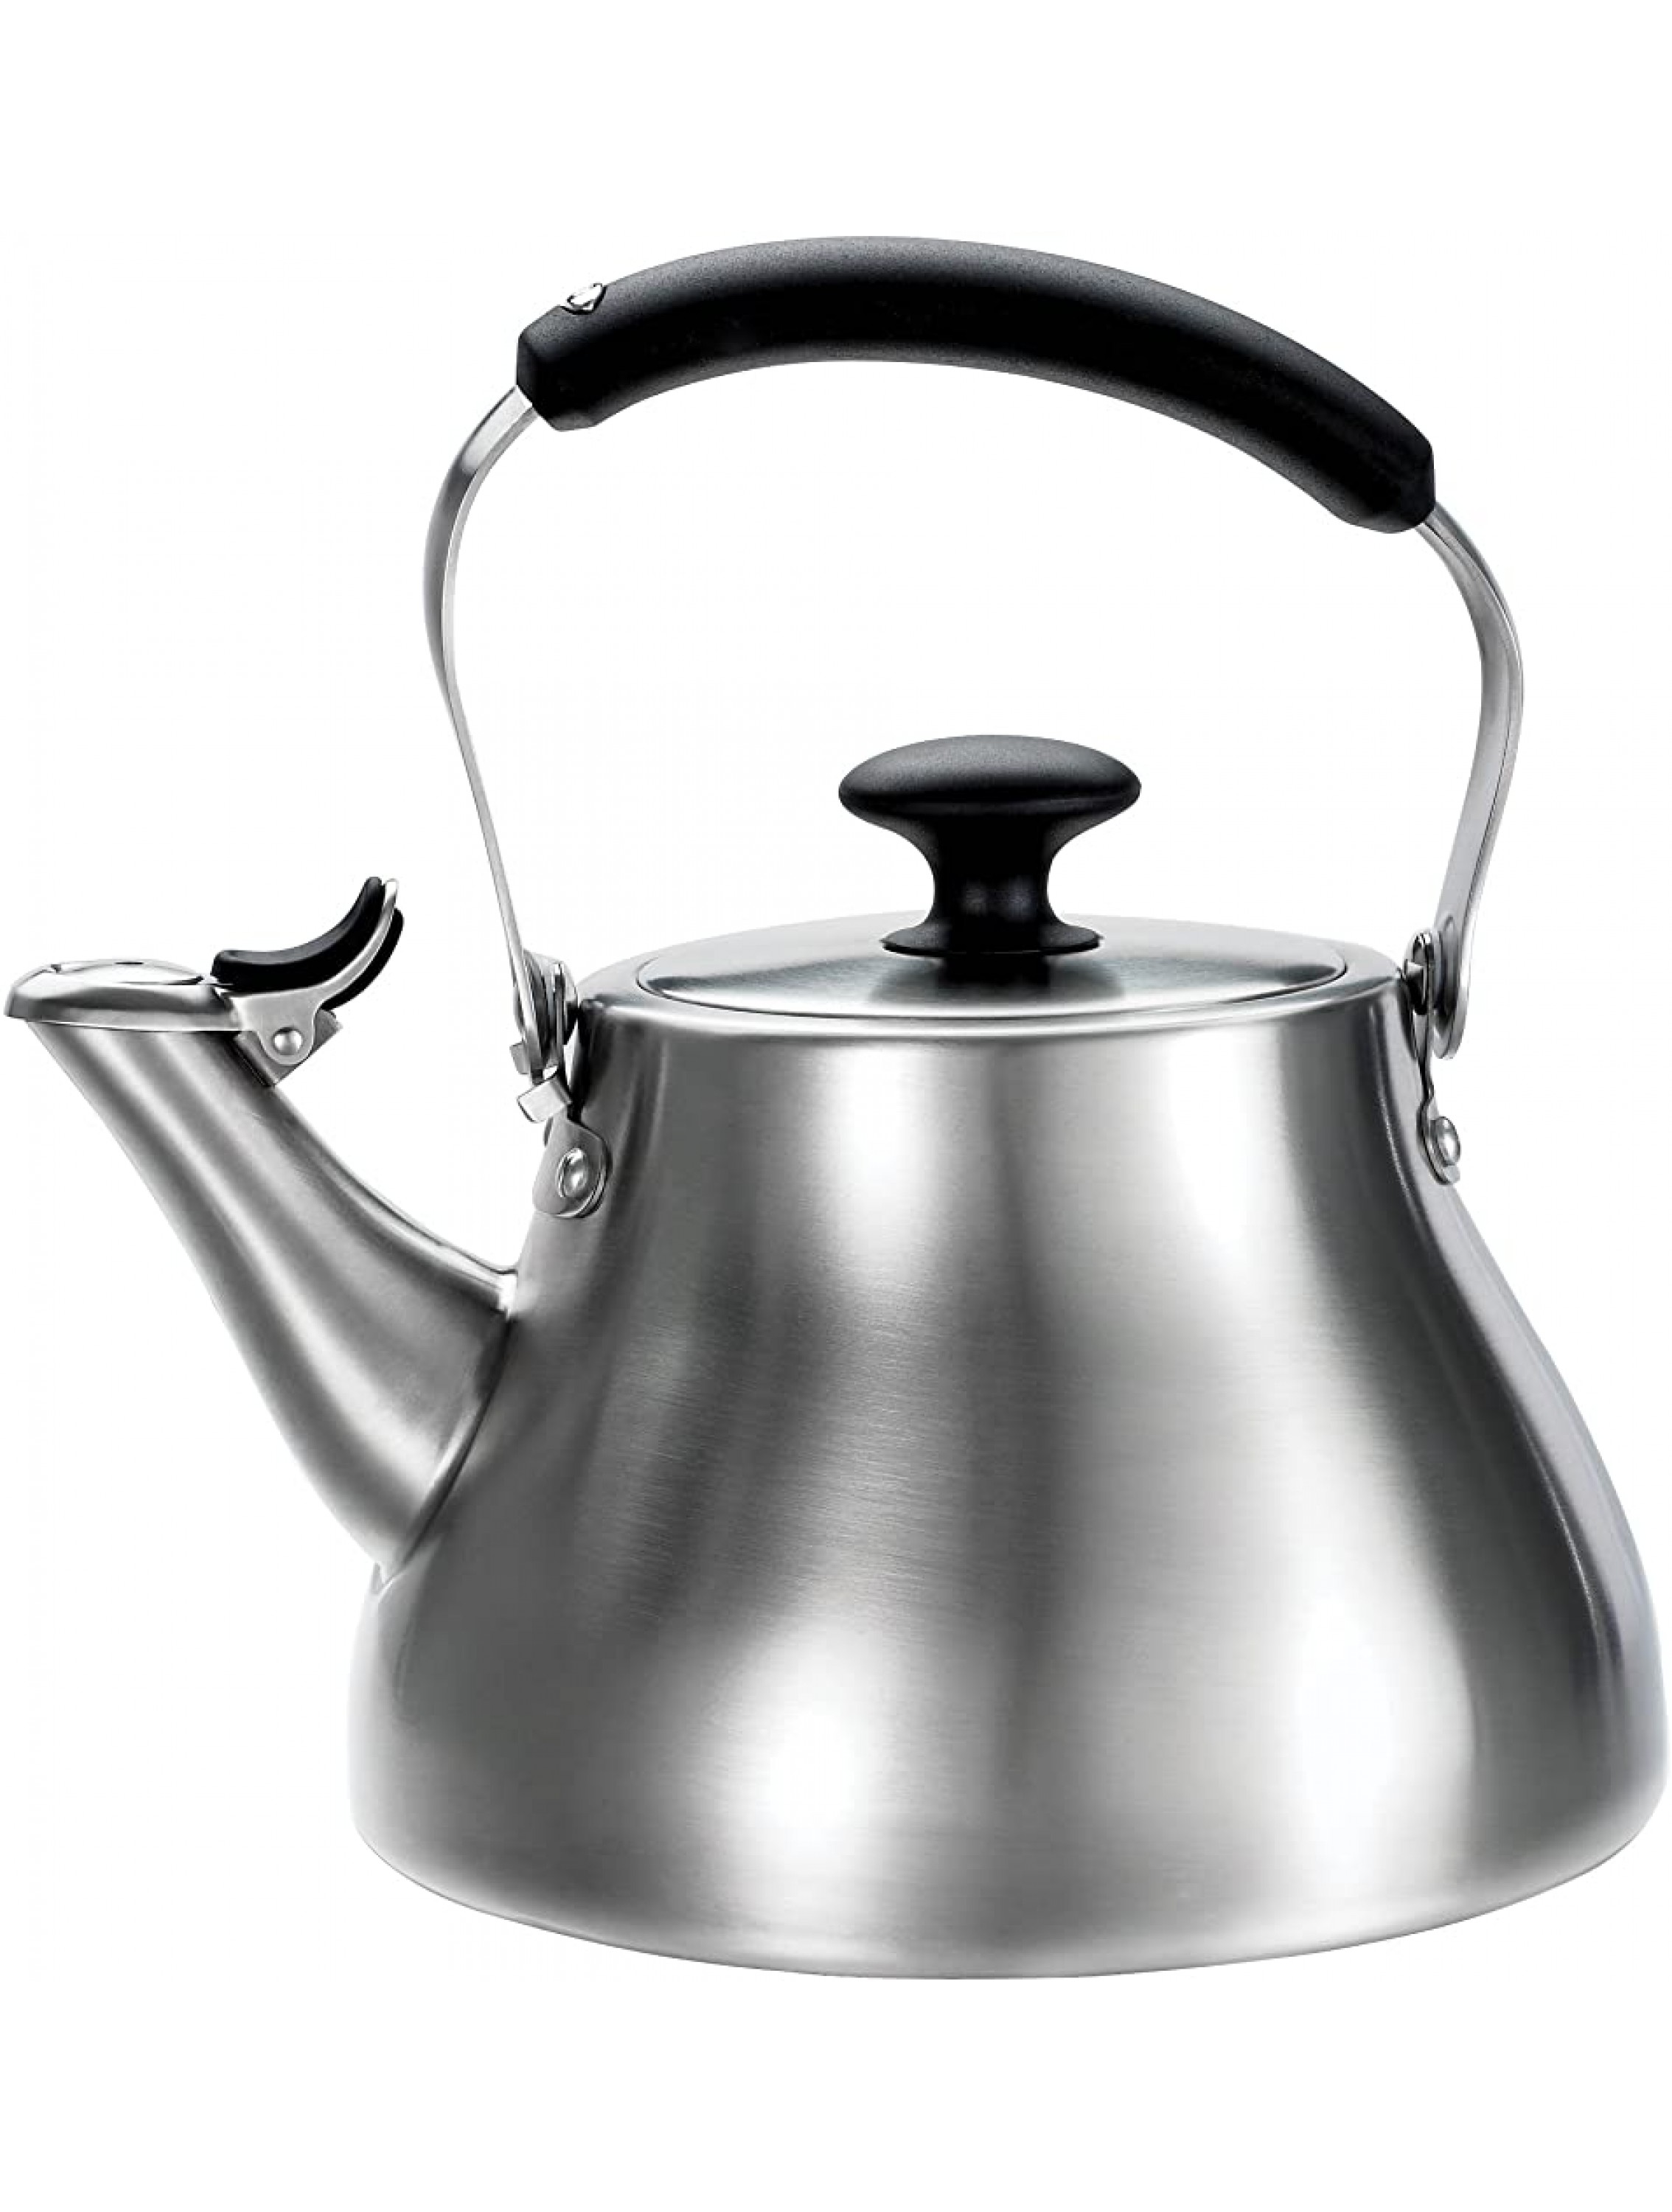 OXO BREW Classic Tea Kettle Brushed Stainless Steel - BRCWD9IW9